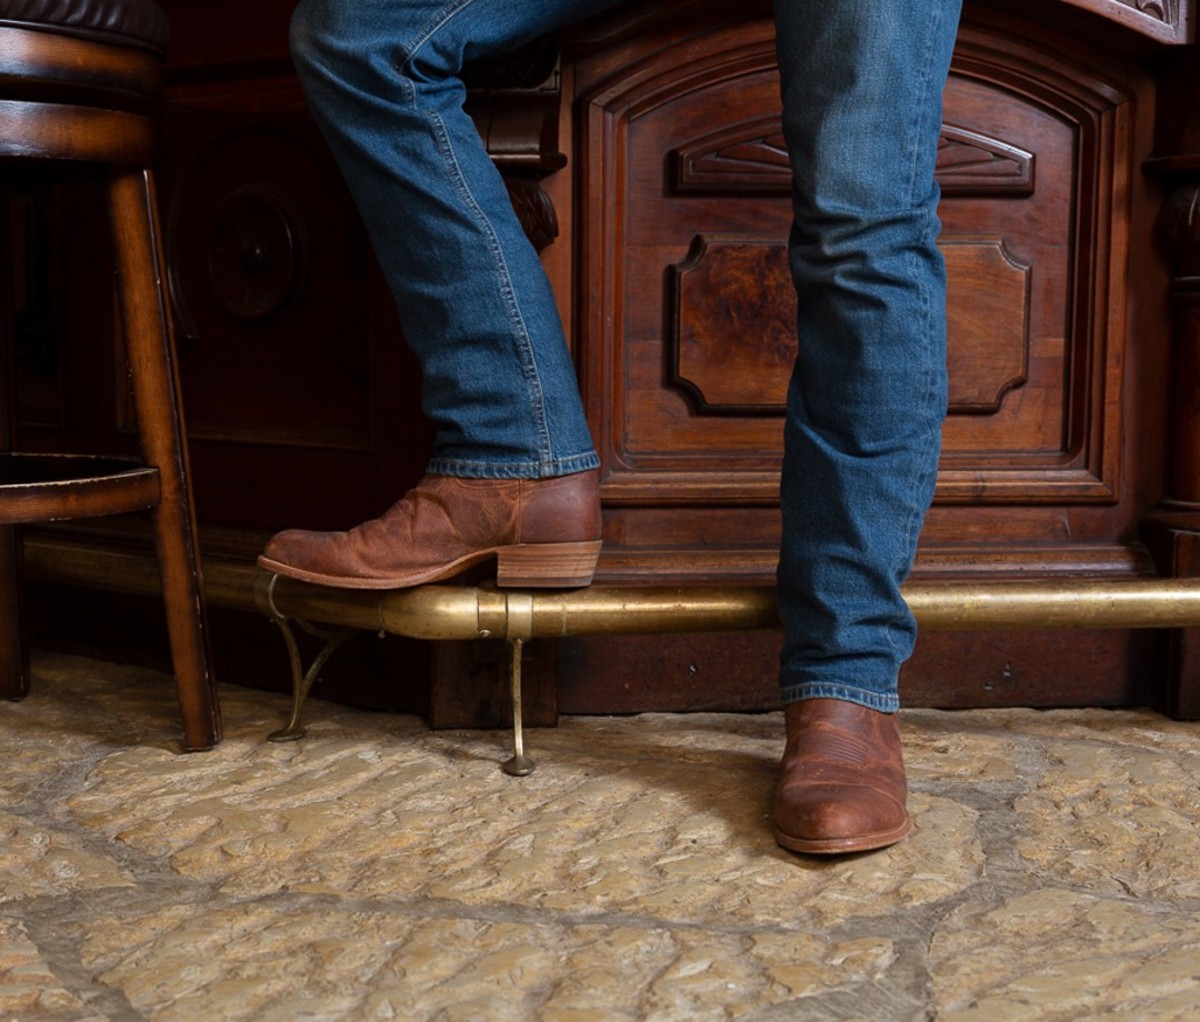 Men's legs in denim and brown boots standing against bar